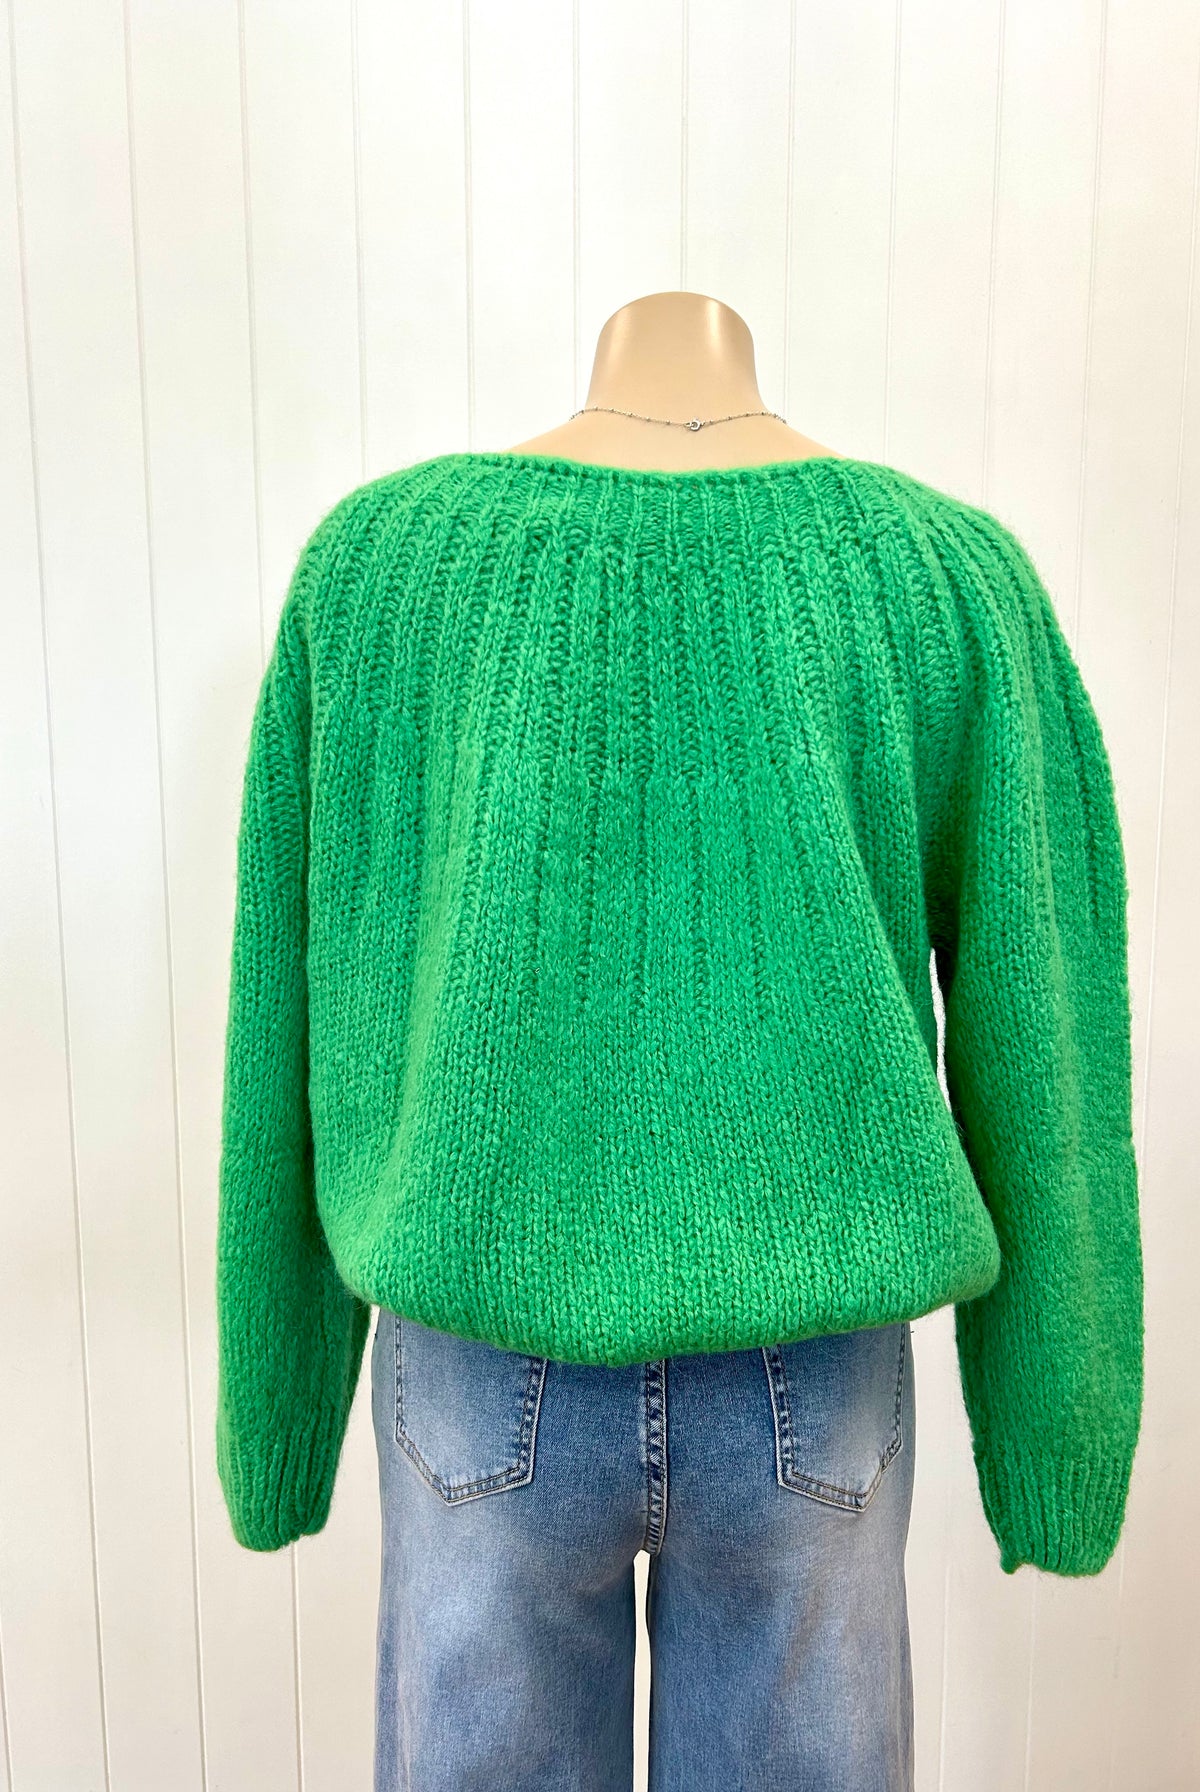 Marcy knit - apple green